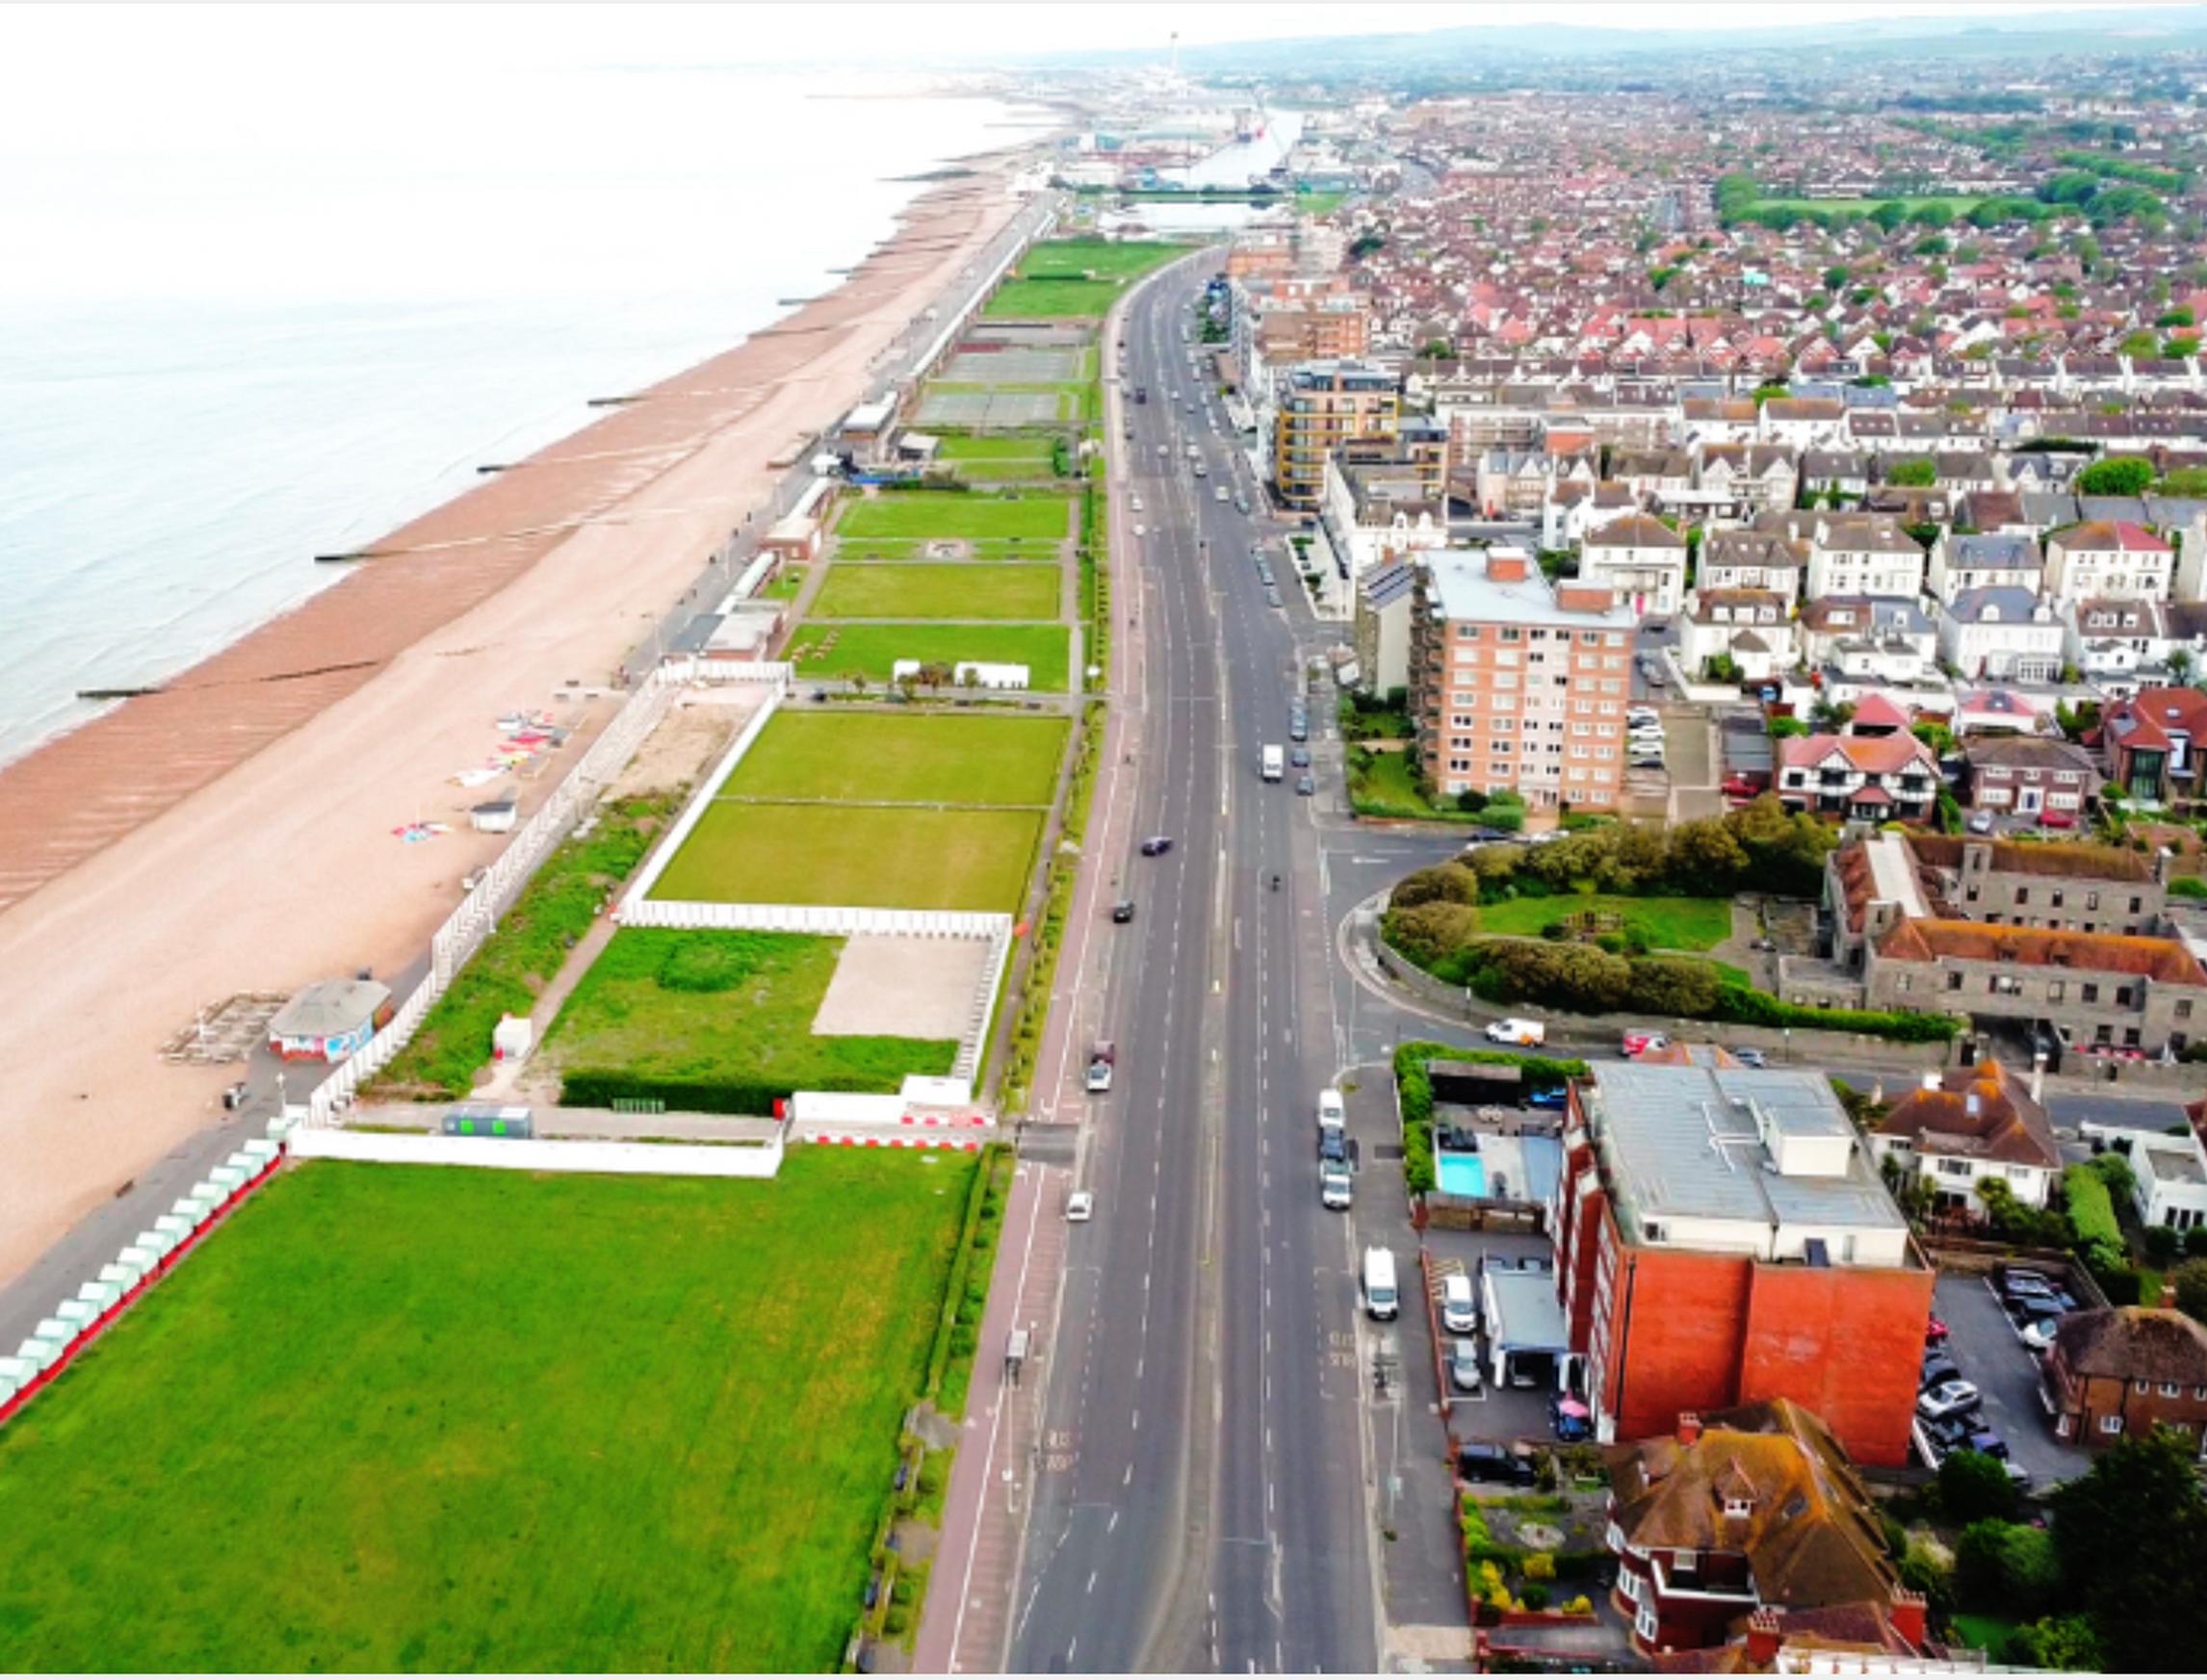 The council has shelved original plans to reduce the number of lanes of traffic from four to three on a stretch of the A259 between Fourth Avenue and Wharf Road by Hove Lagoon.